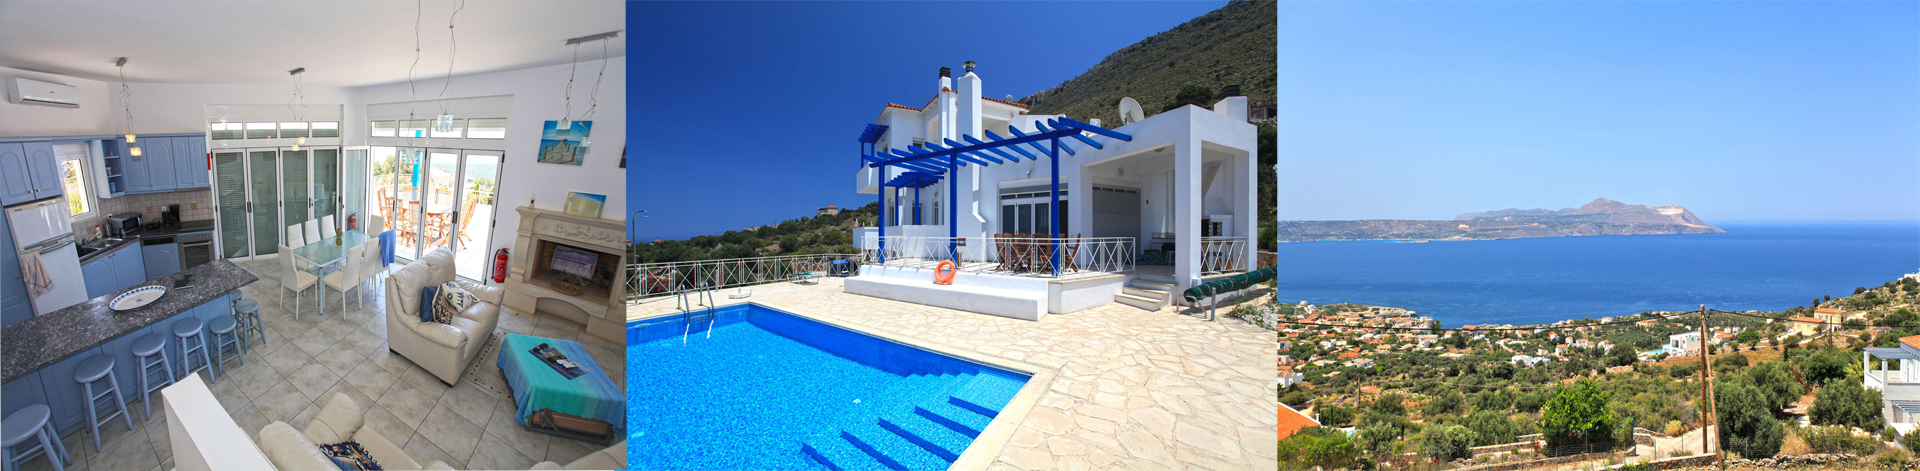 DC-1025 4 Bed Luxury Villa and Pool in Kokkino Chorio €750,000